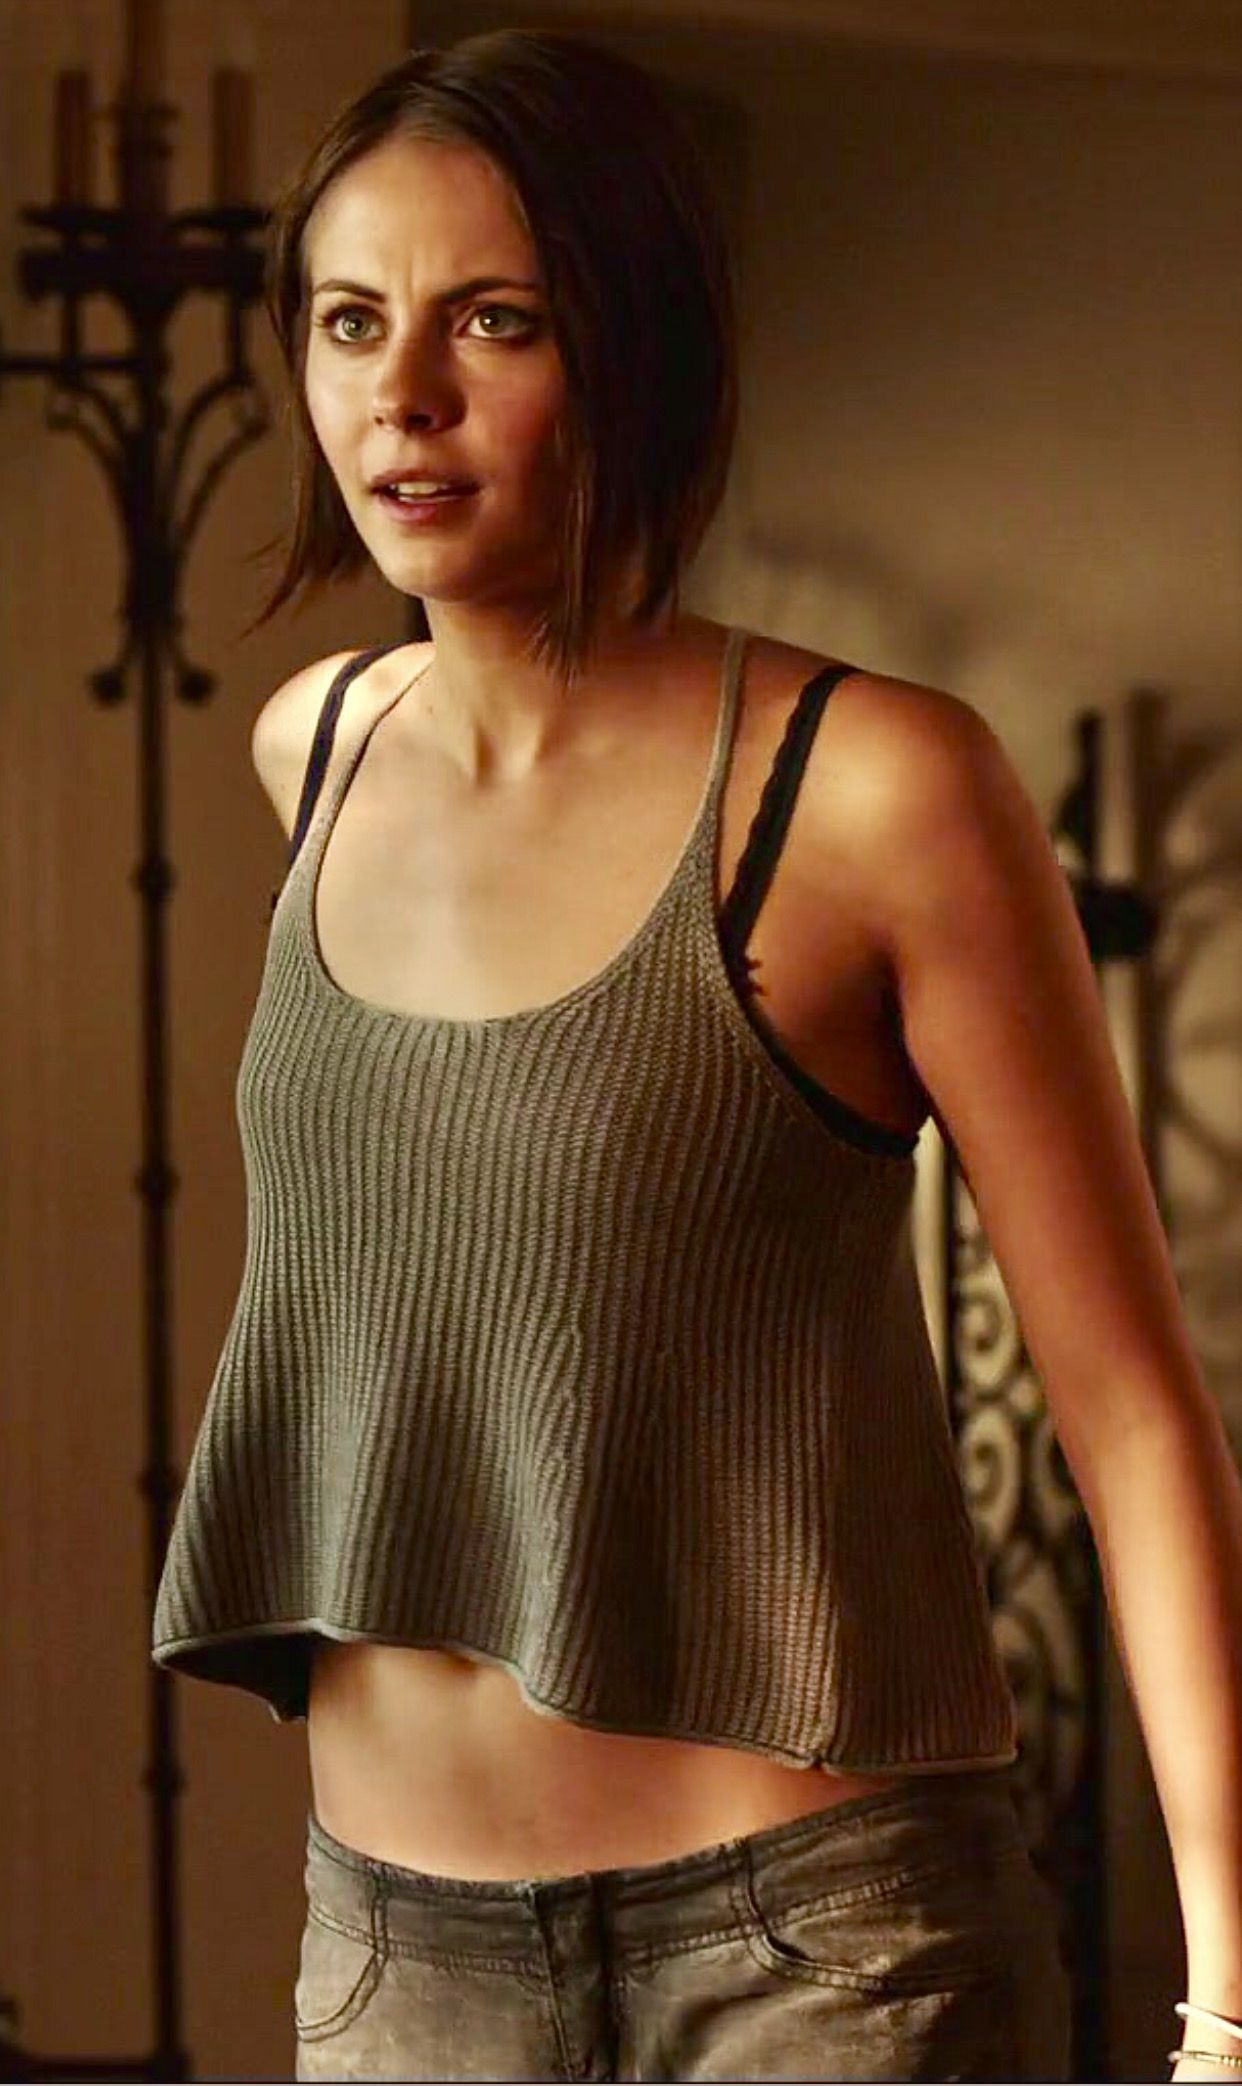 Willa Holland fucking gets me! Always in the coolest casual outfits if she's wearing anything